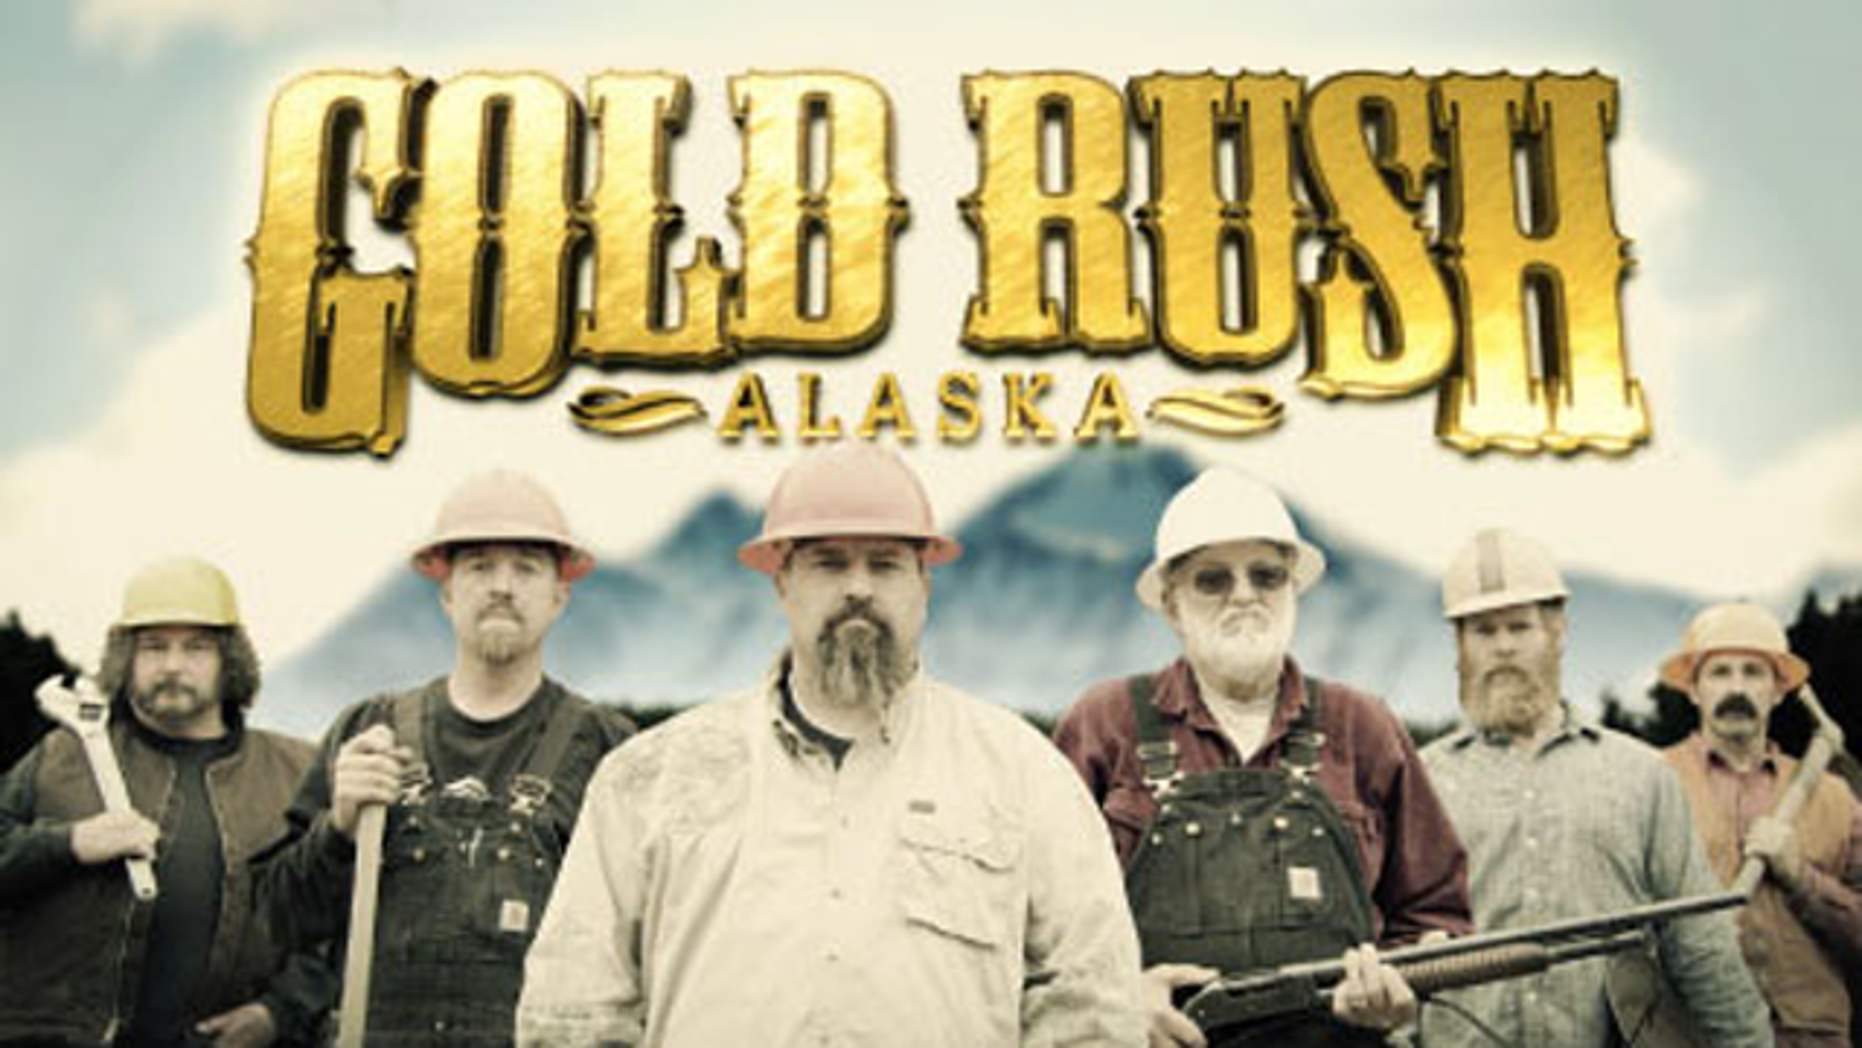 who sells discovery channel gold rush series